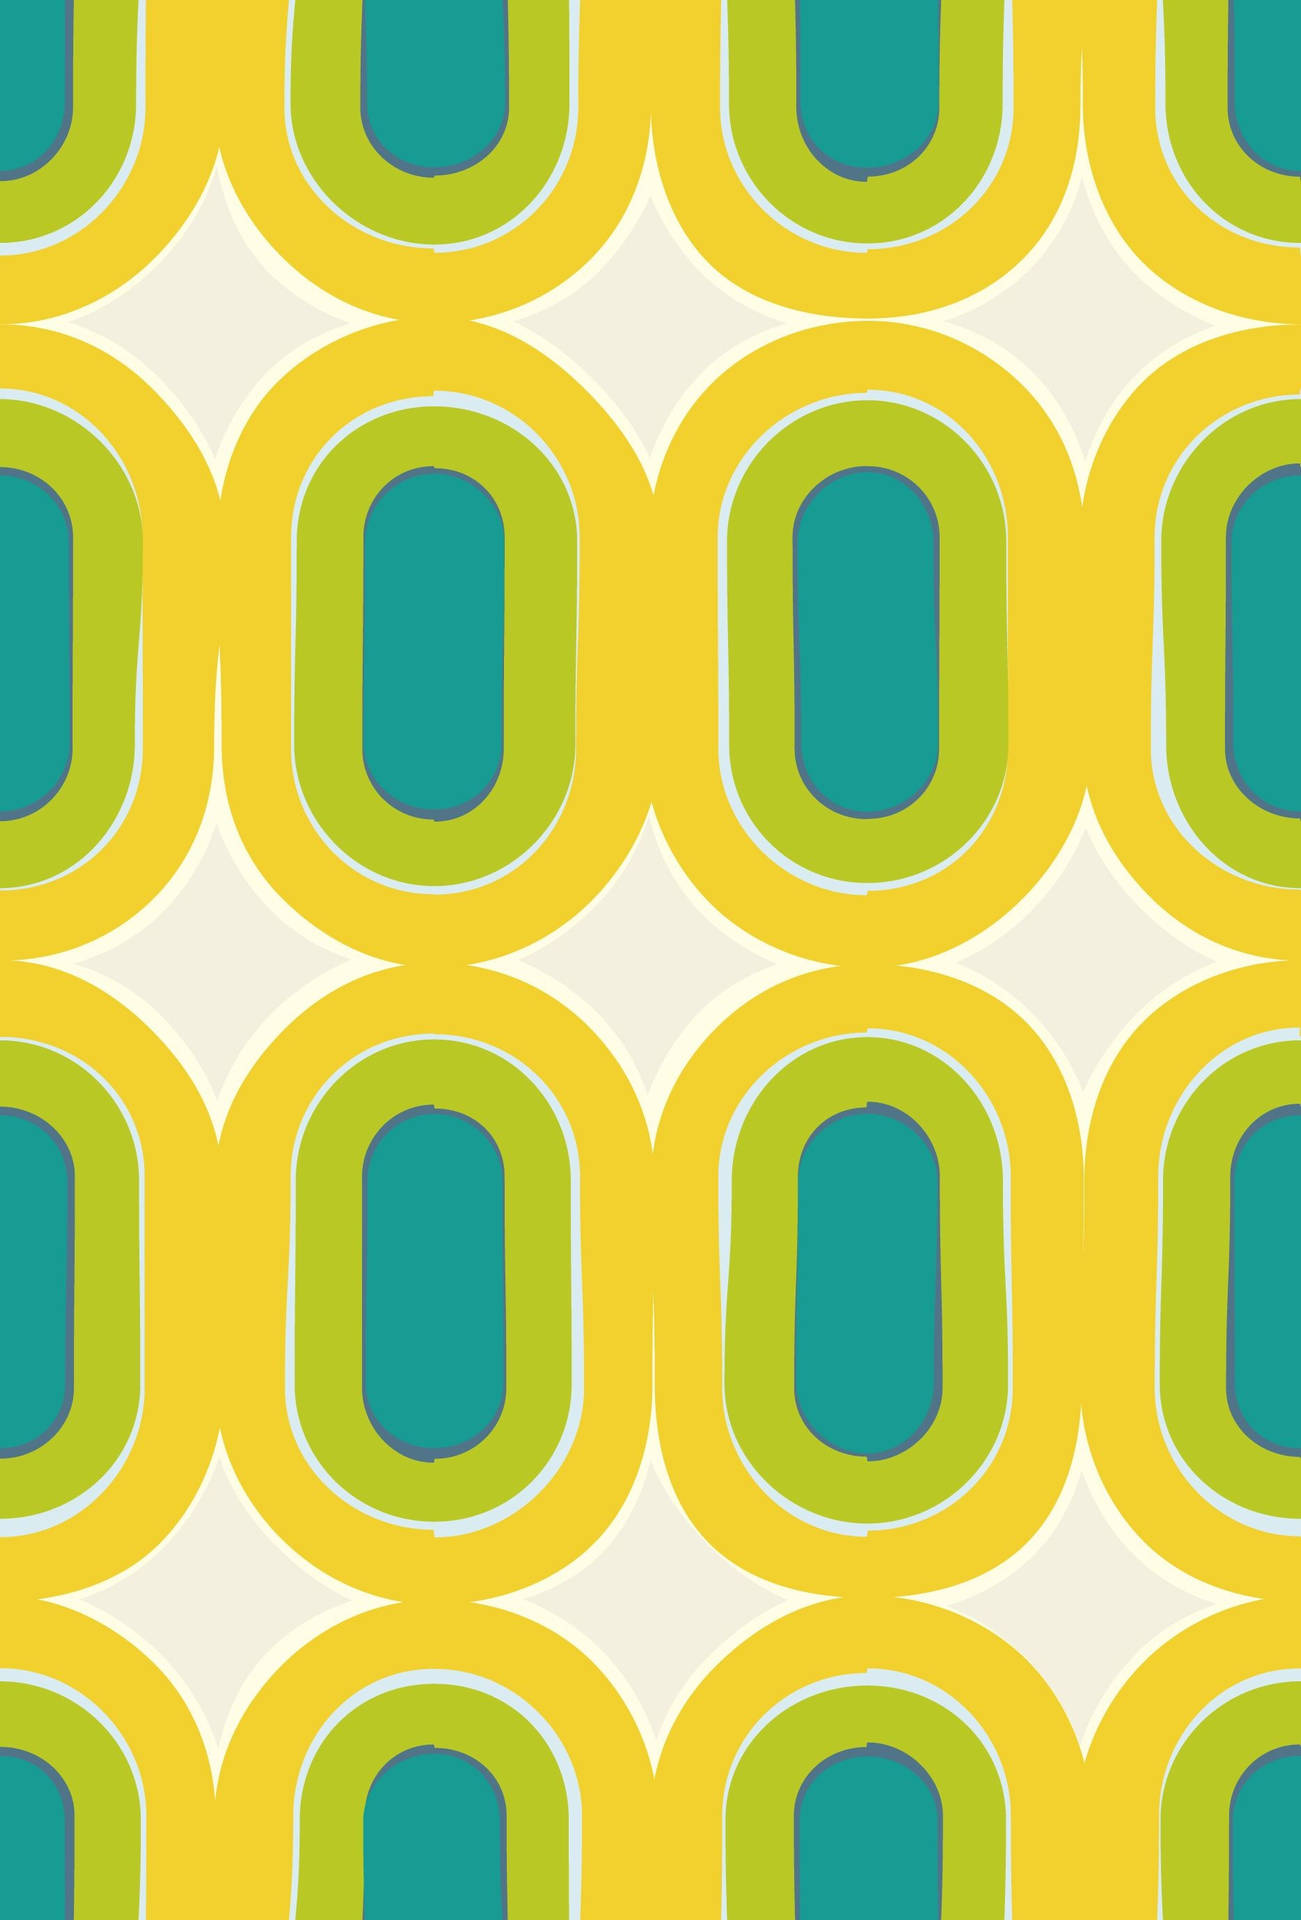 70s Yellow Green Oblong Pattern Background